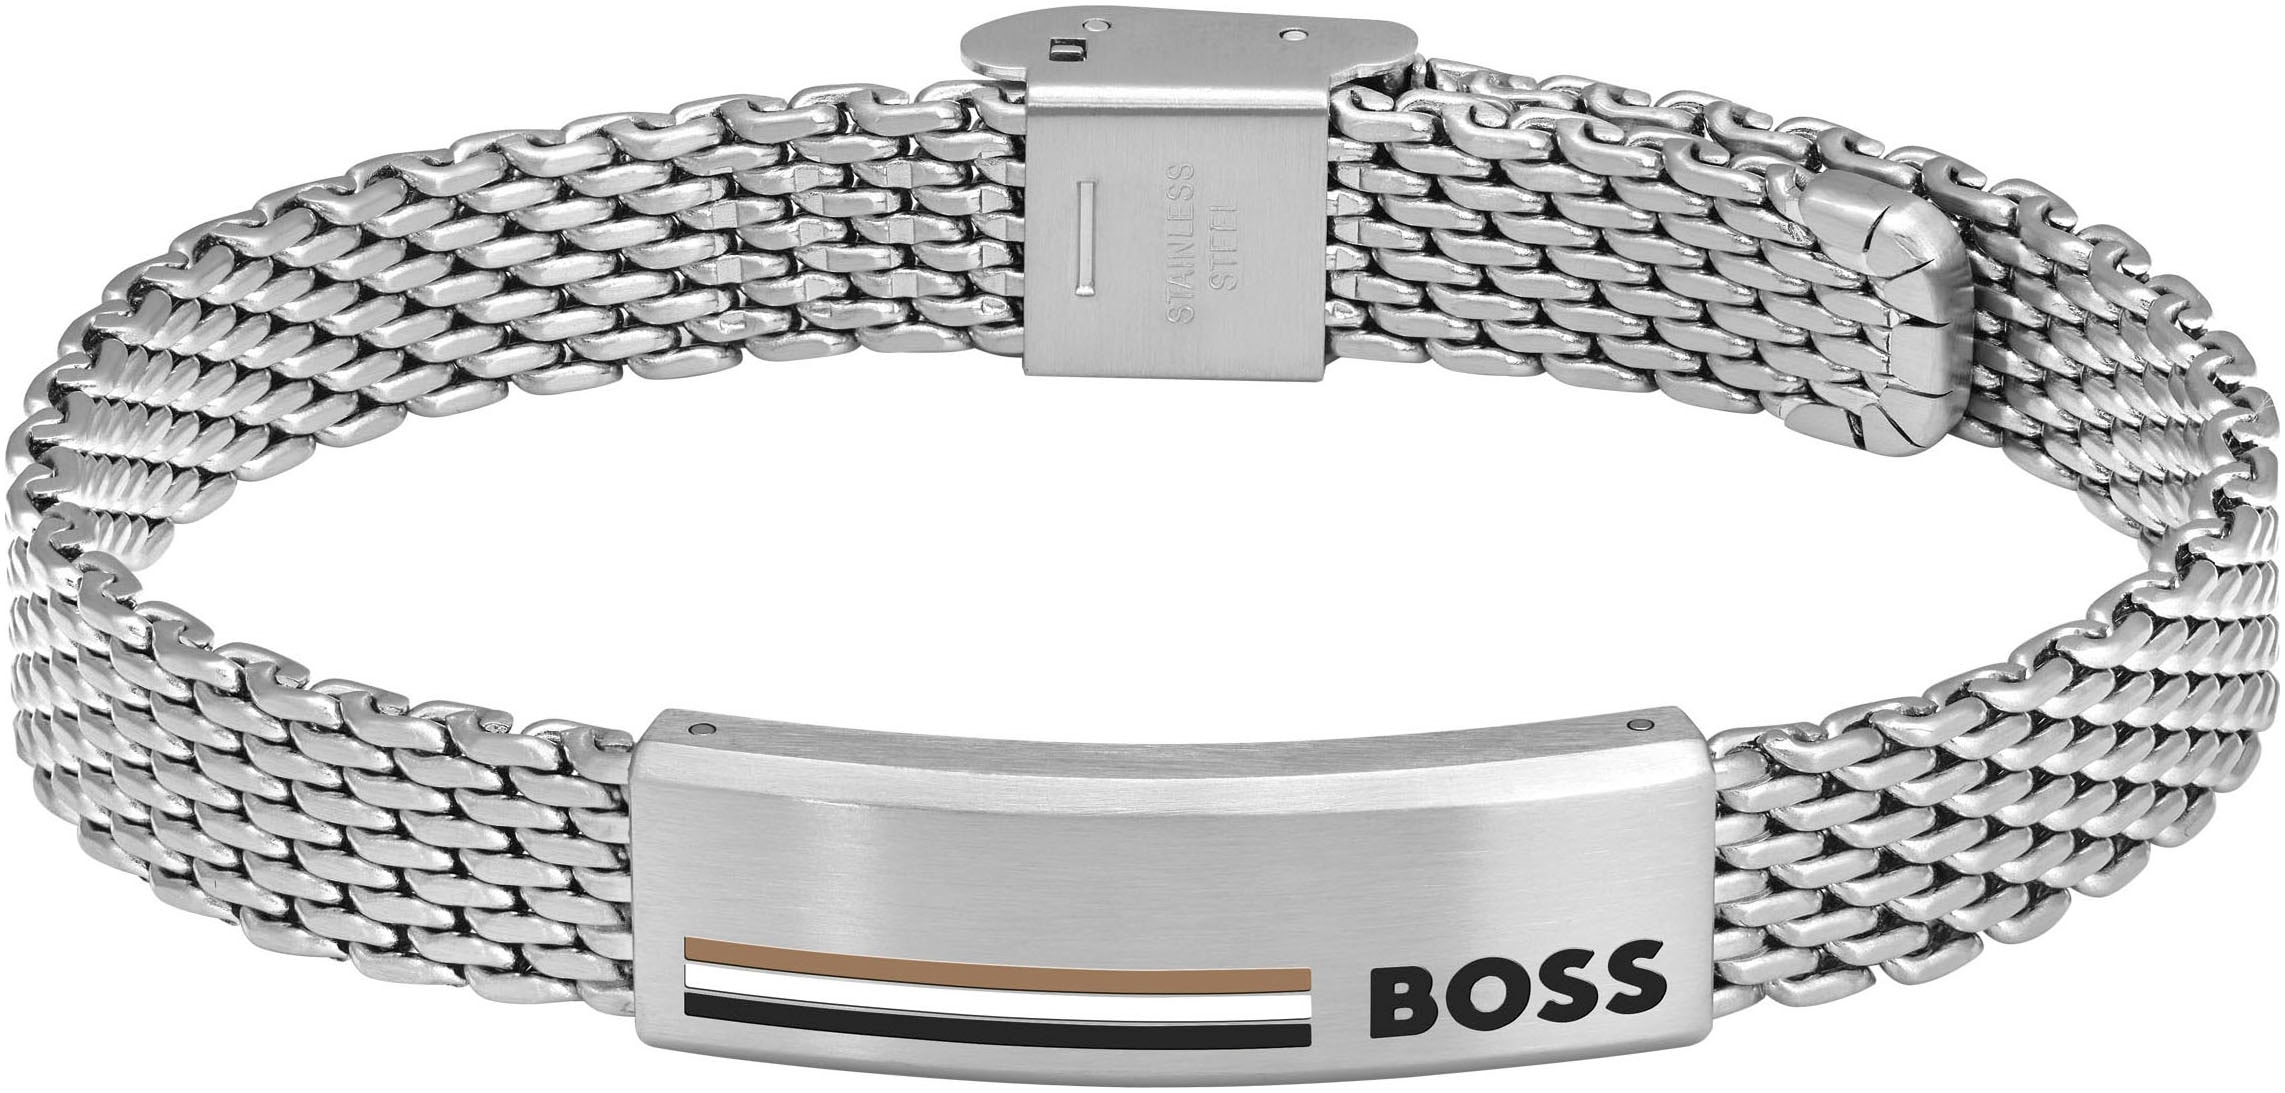 BOSS Armband »ALEN, 1580610, 1580611, 1580612«, mit Emaille